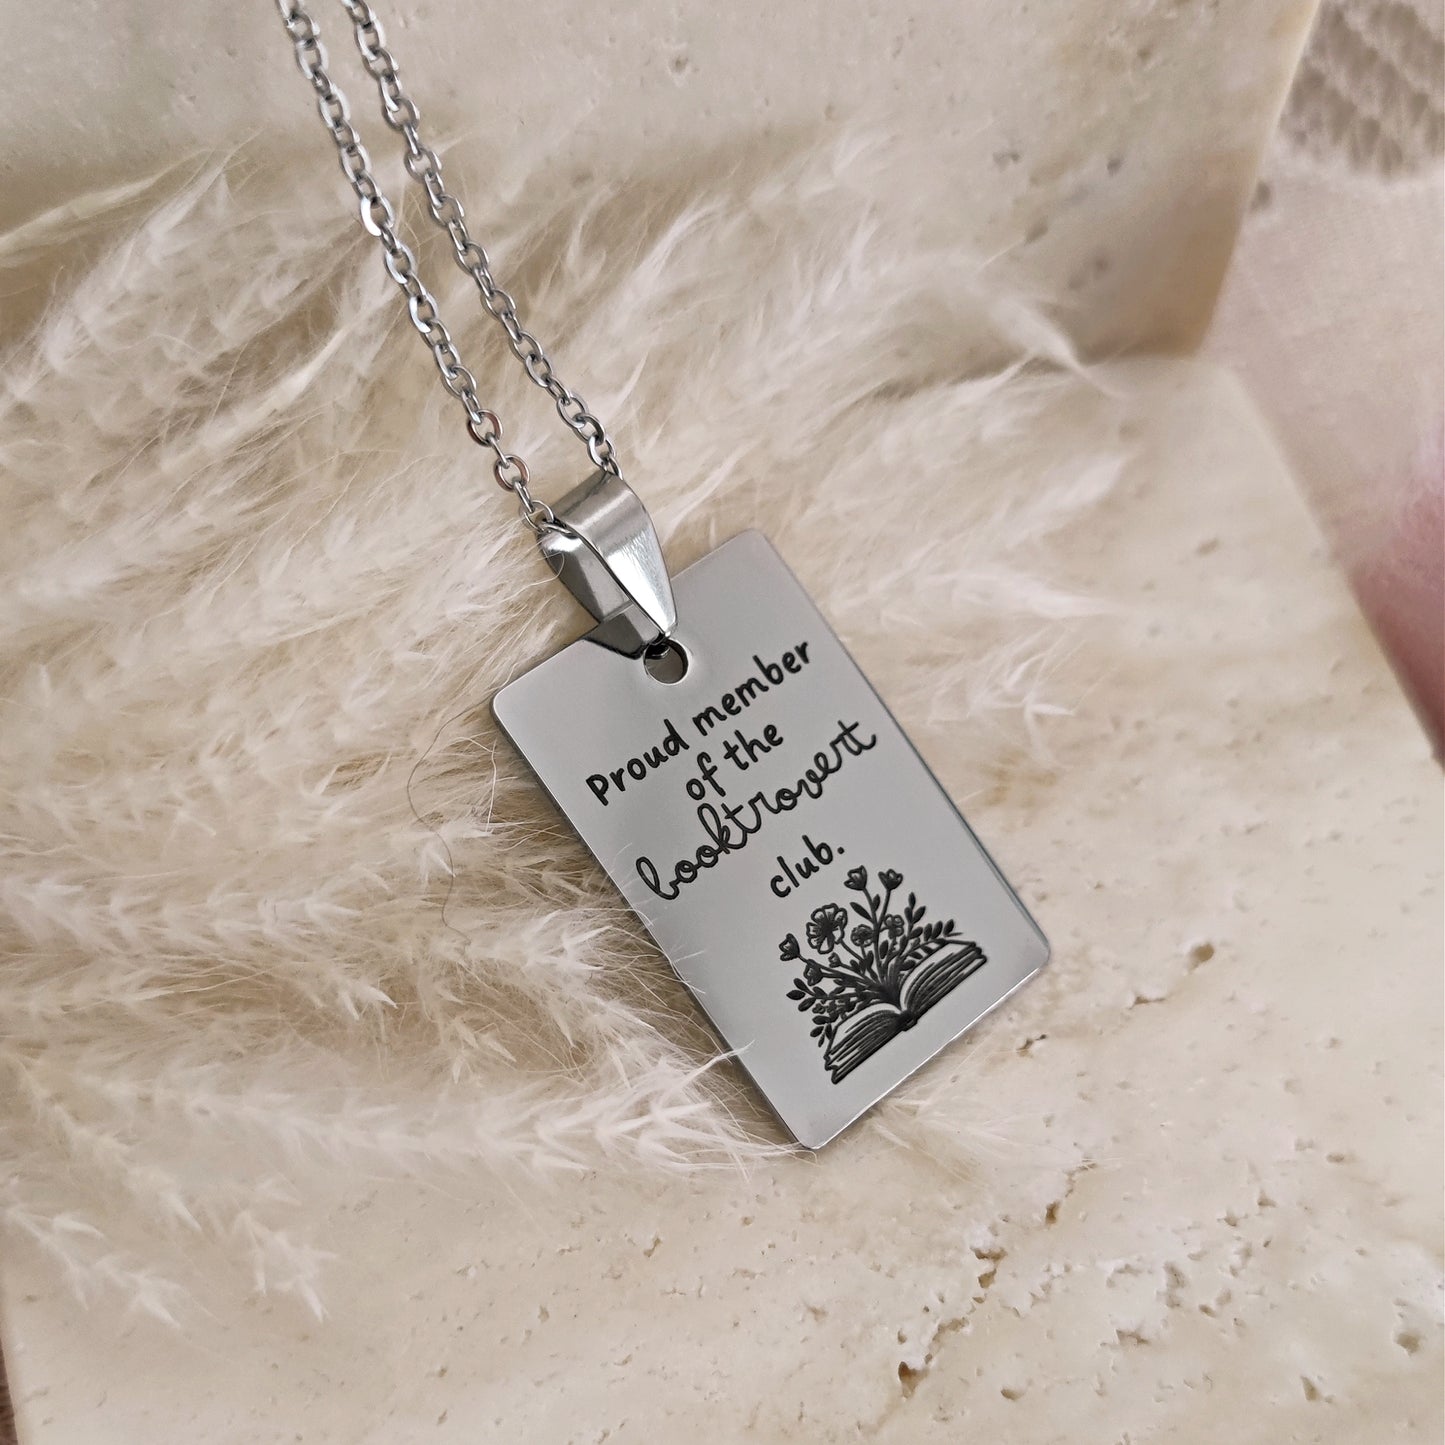 Proud Member of Bookrovert Club Necklace, Booktrovert Necklace, Bookish Necklace, Reader Enthusiast